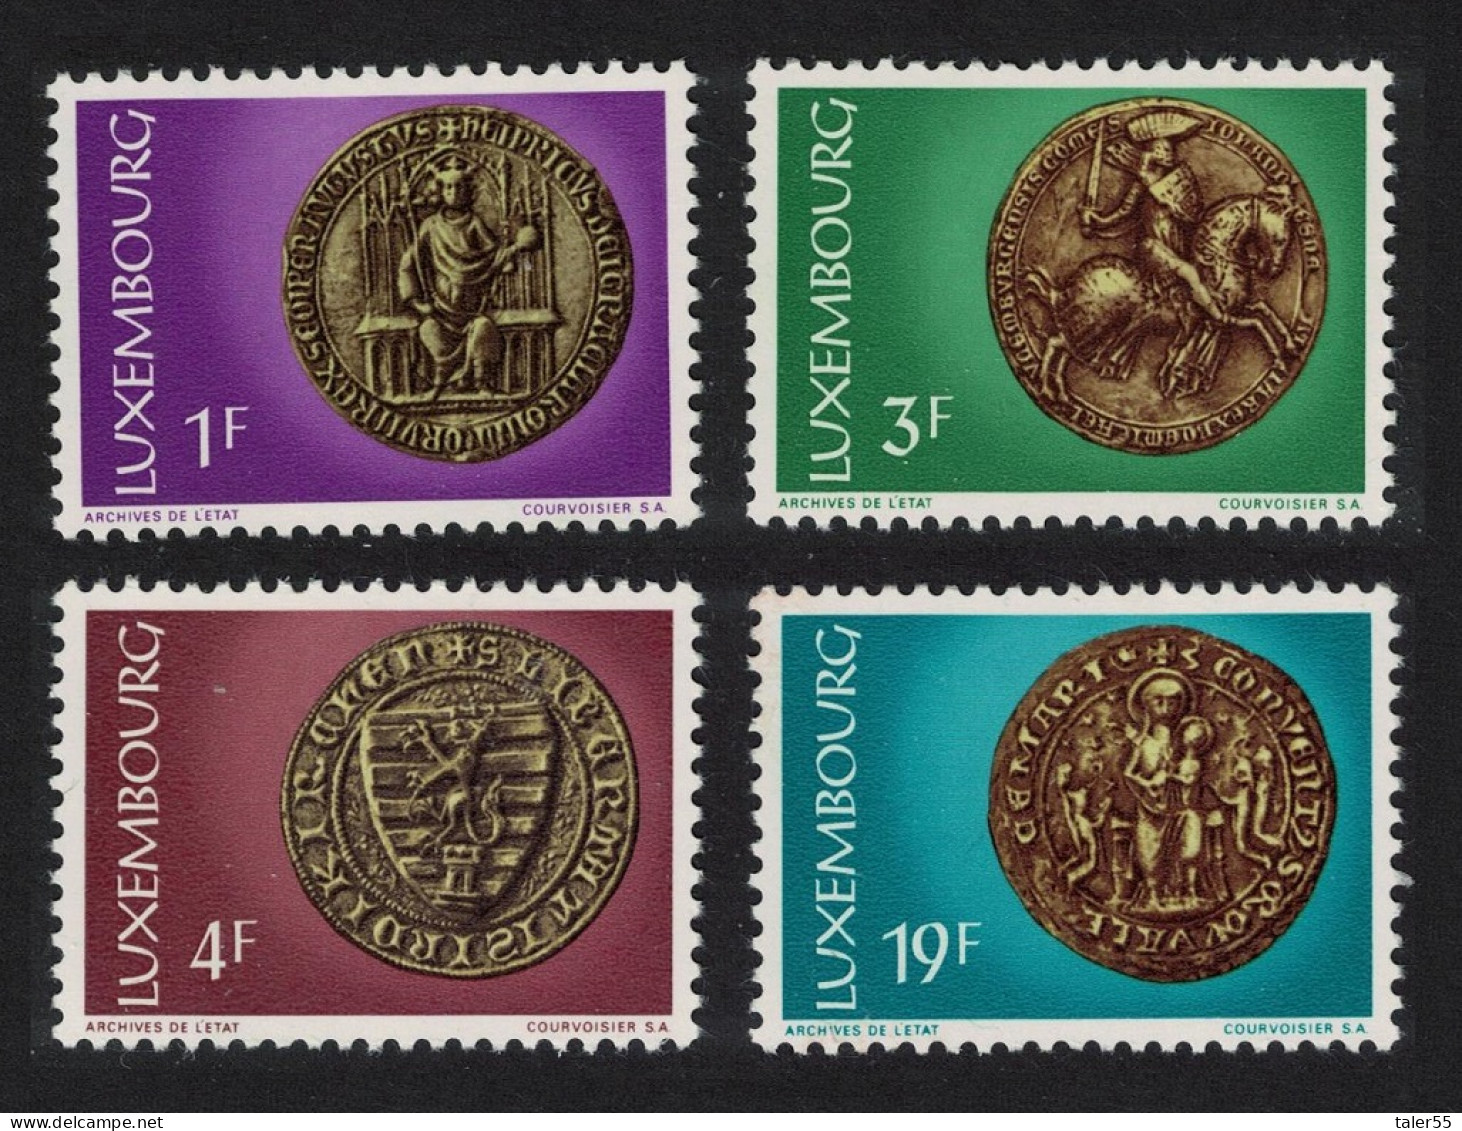 Luxembourg Seals In Luxembourg State Archives 4v 1974 MNH SG#922-925 MI#878-881 - Nuevos